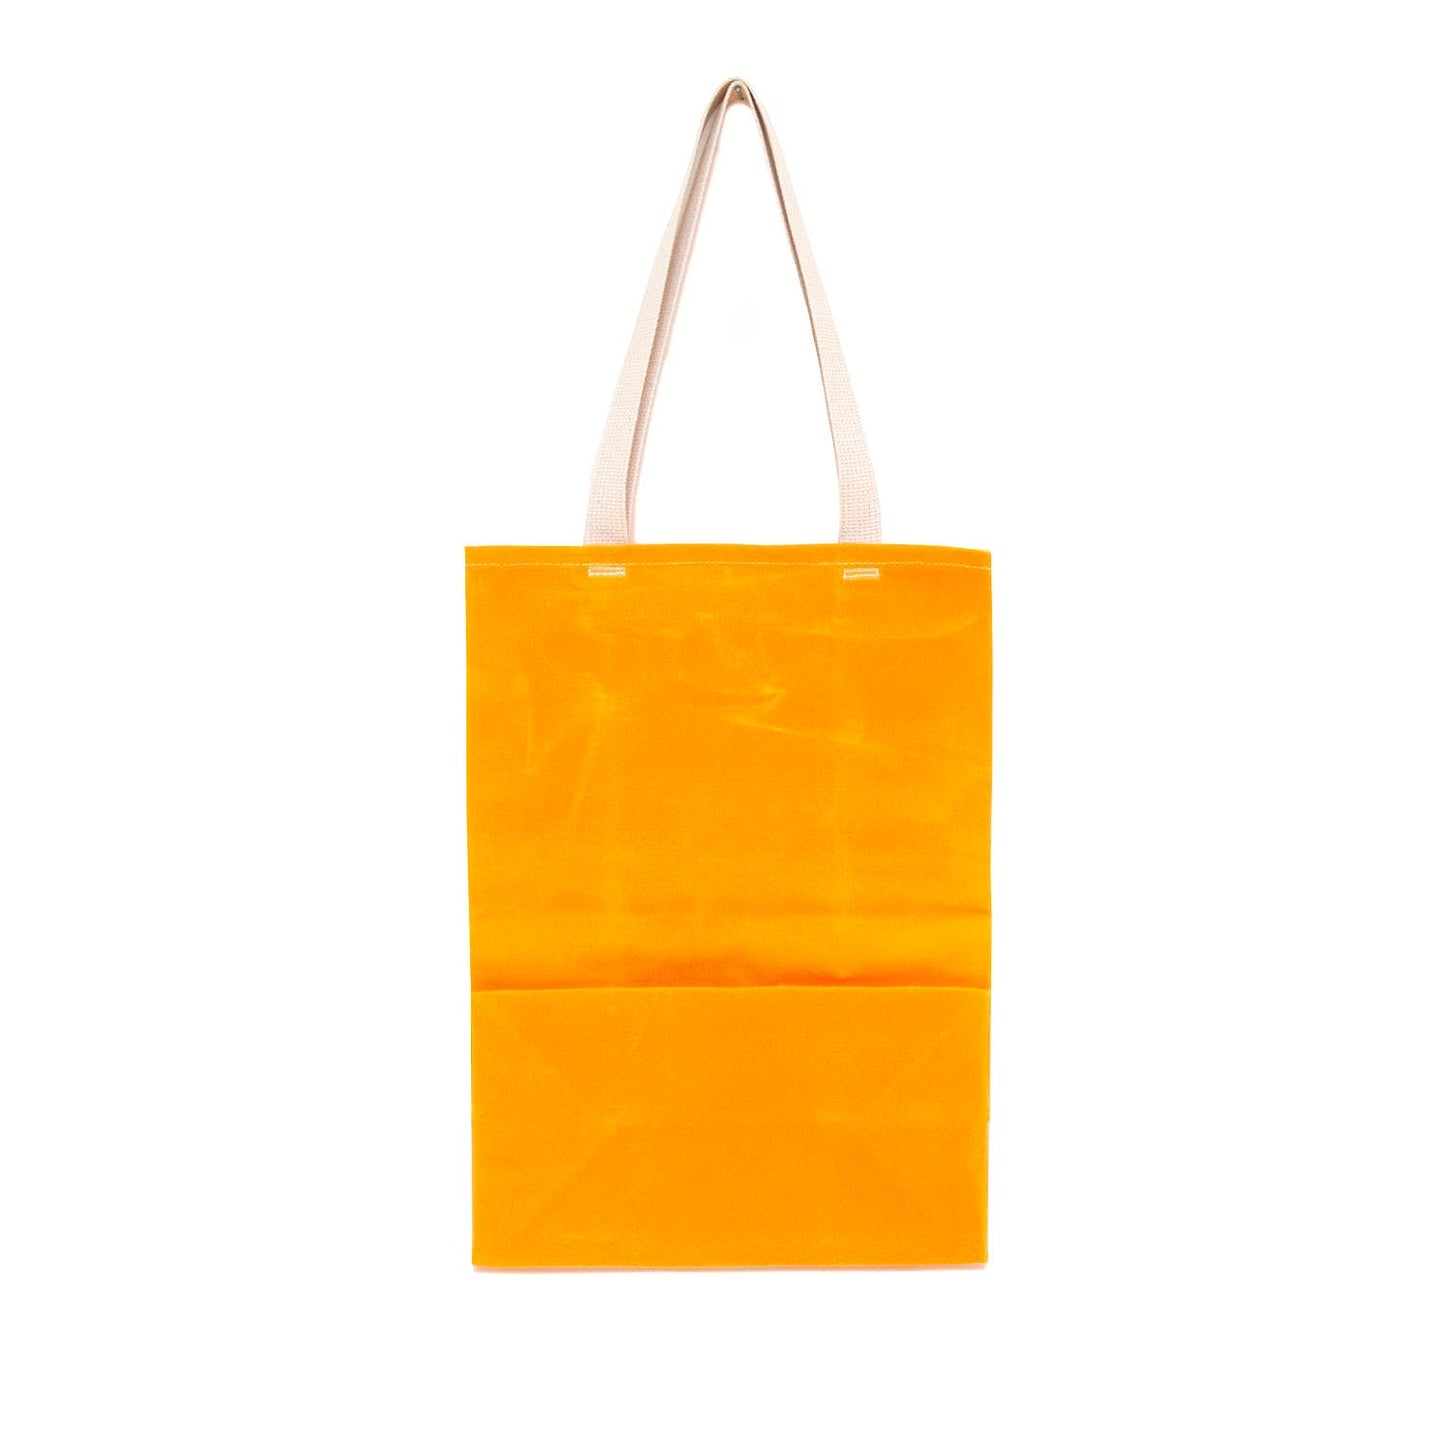 WAAM Industries - Eco-Friendly Grocery Tote, Sunshine Yellow